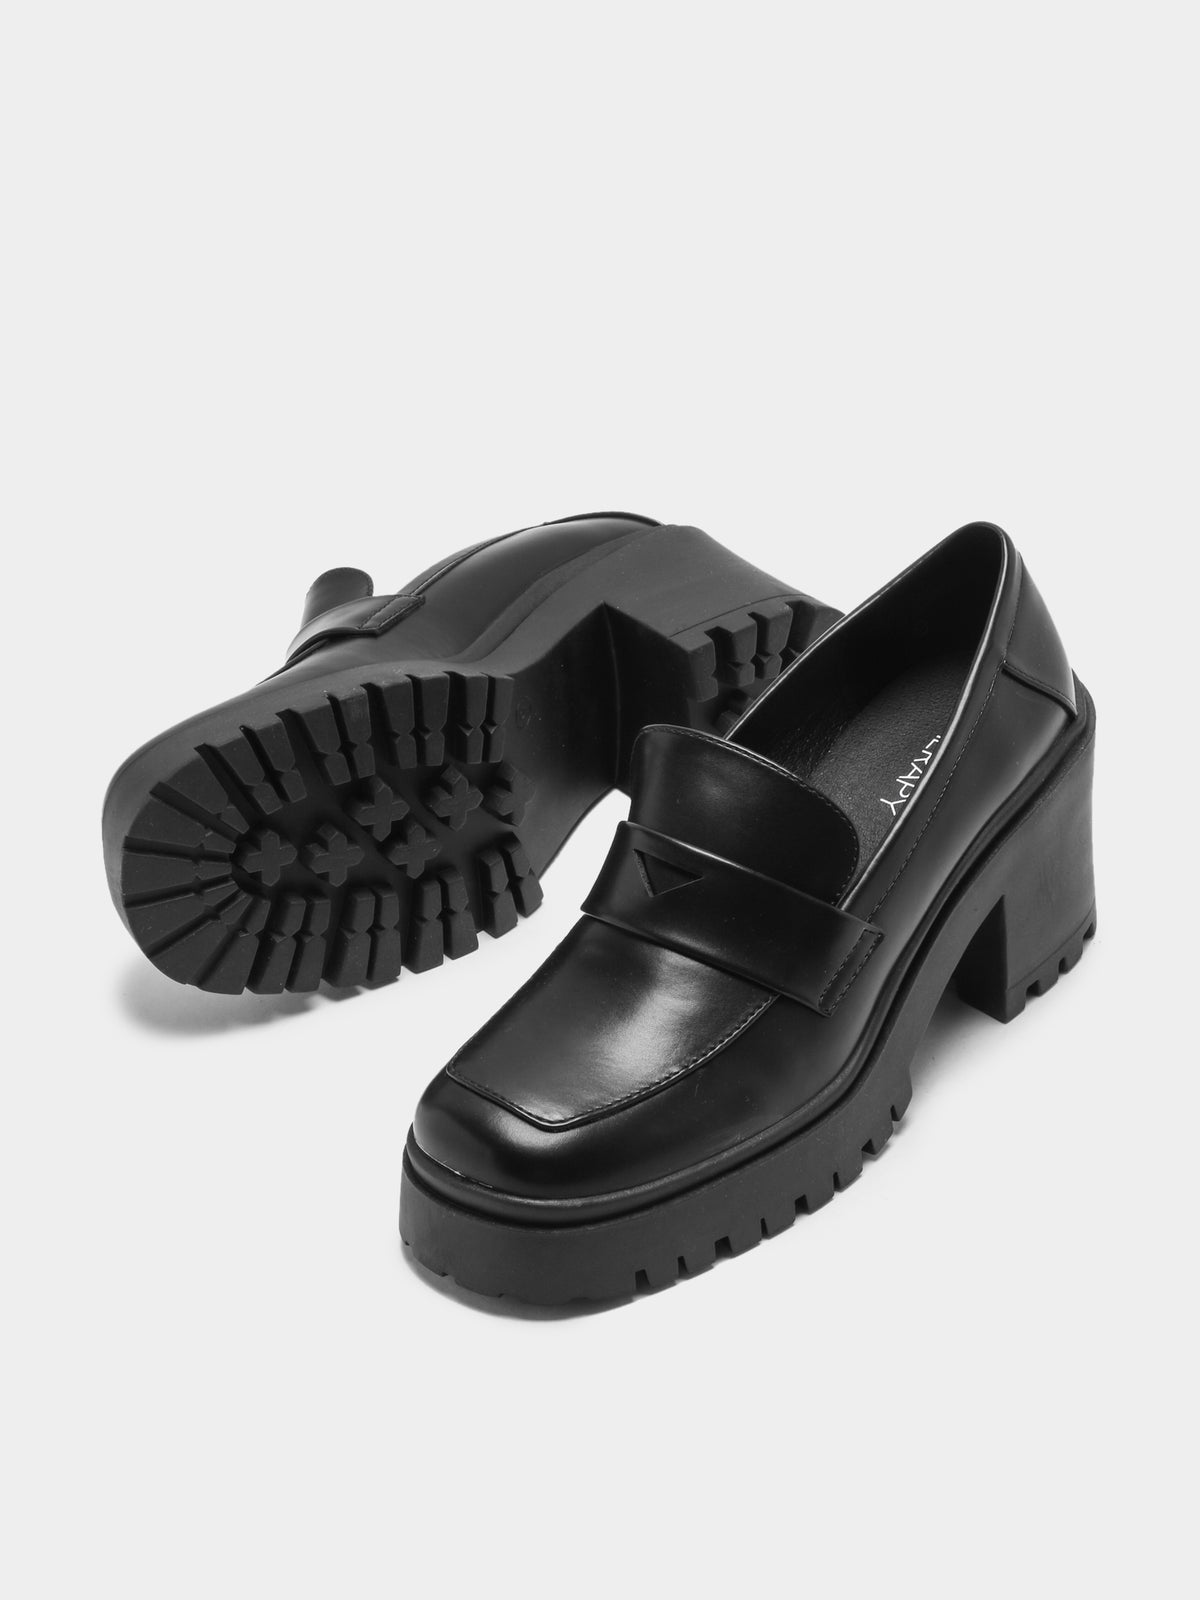 Womens Prompt Heeled Loafers in Black